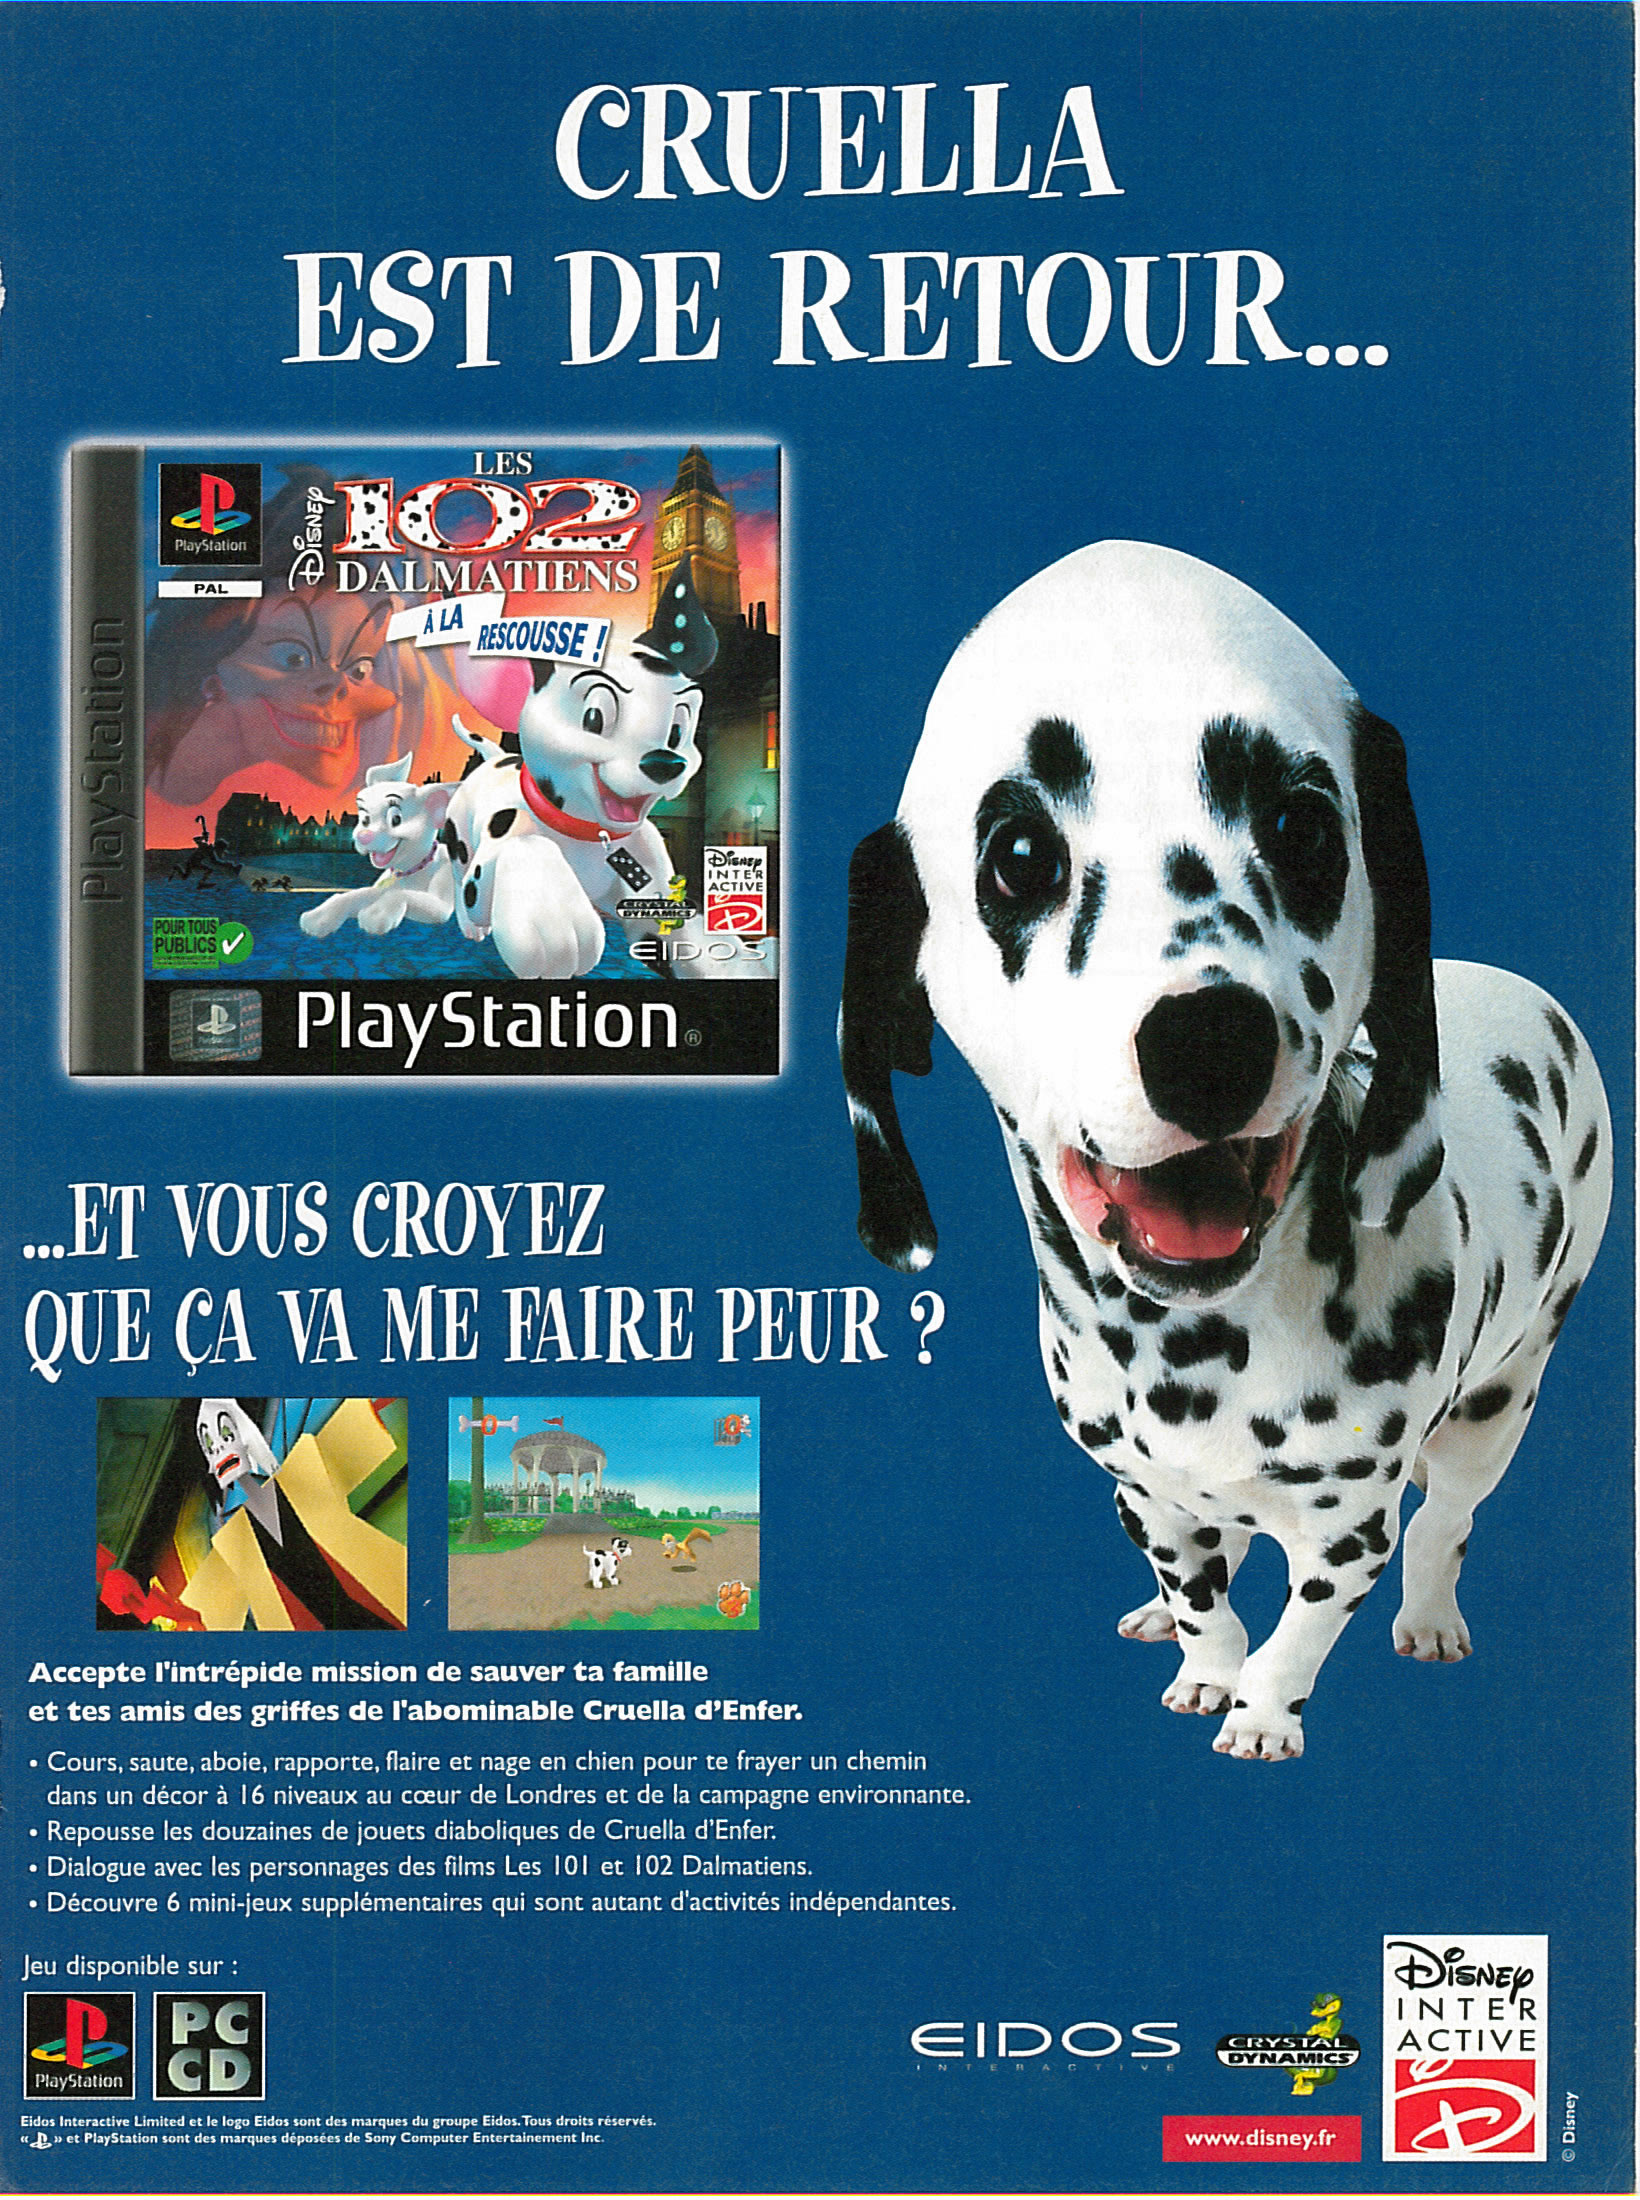 Disney's 102 Dalmatians - Puppies to the rescue PSX cover